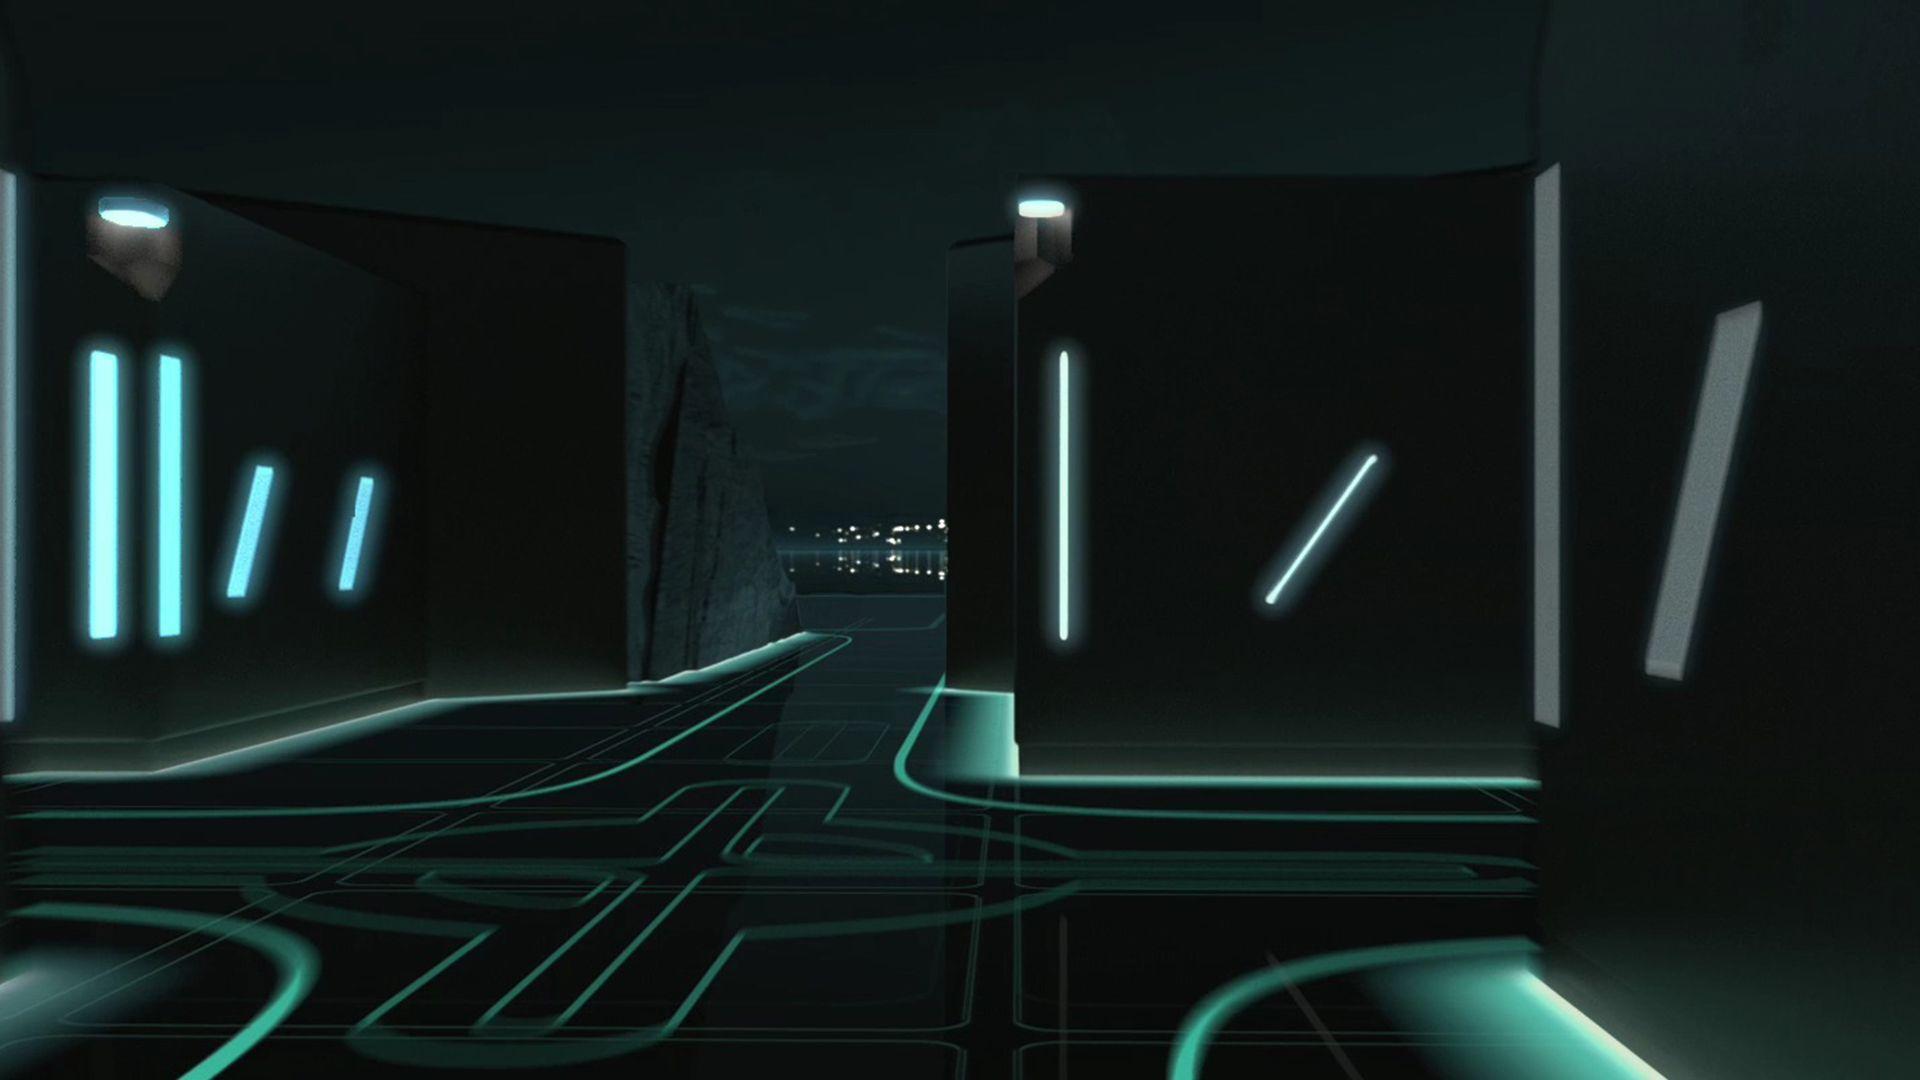 image For > Tron Grid Background HD